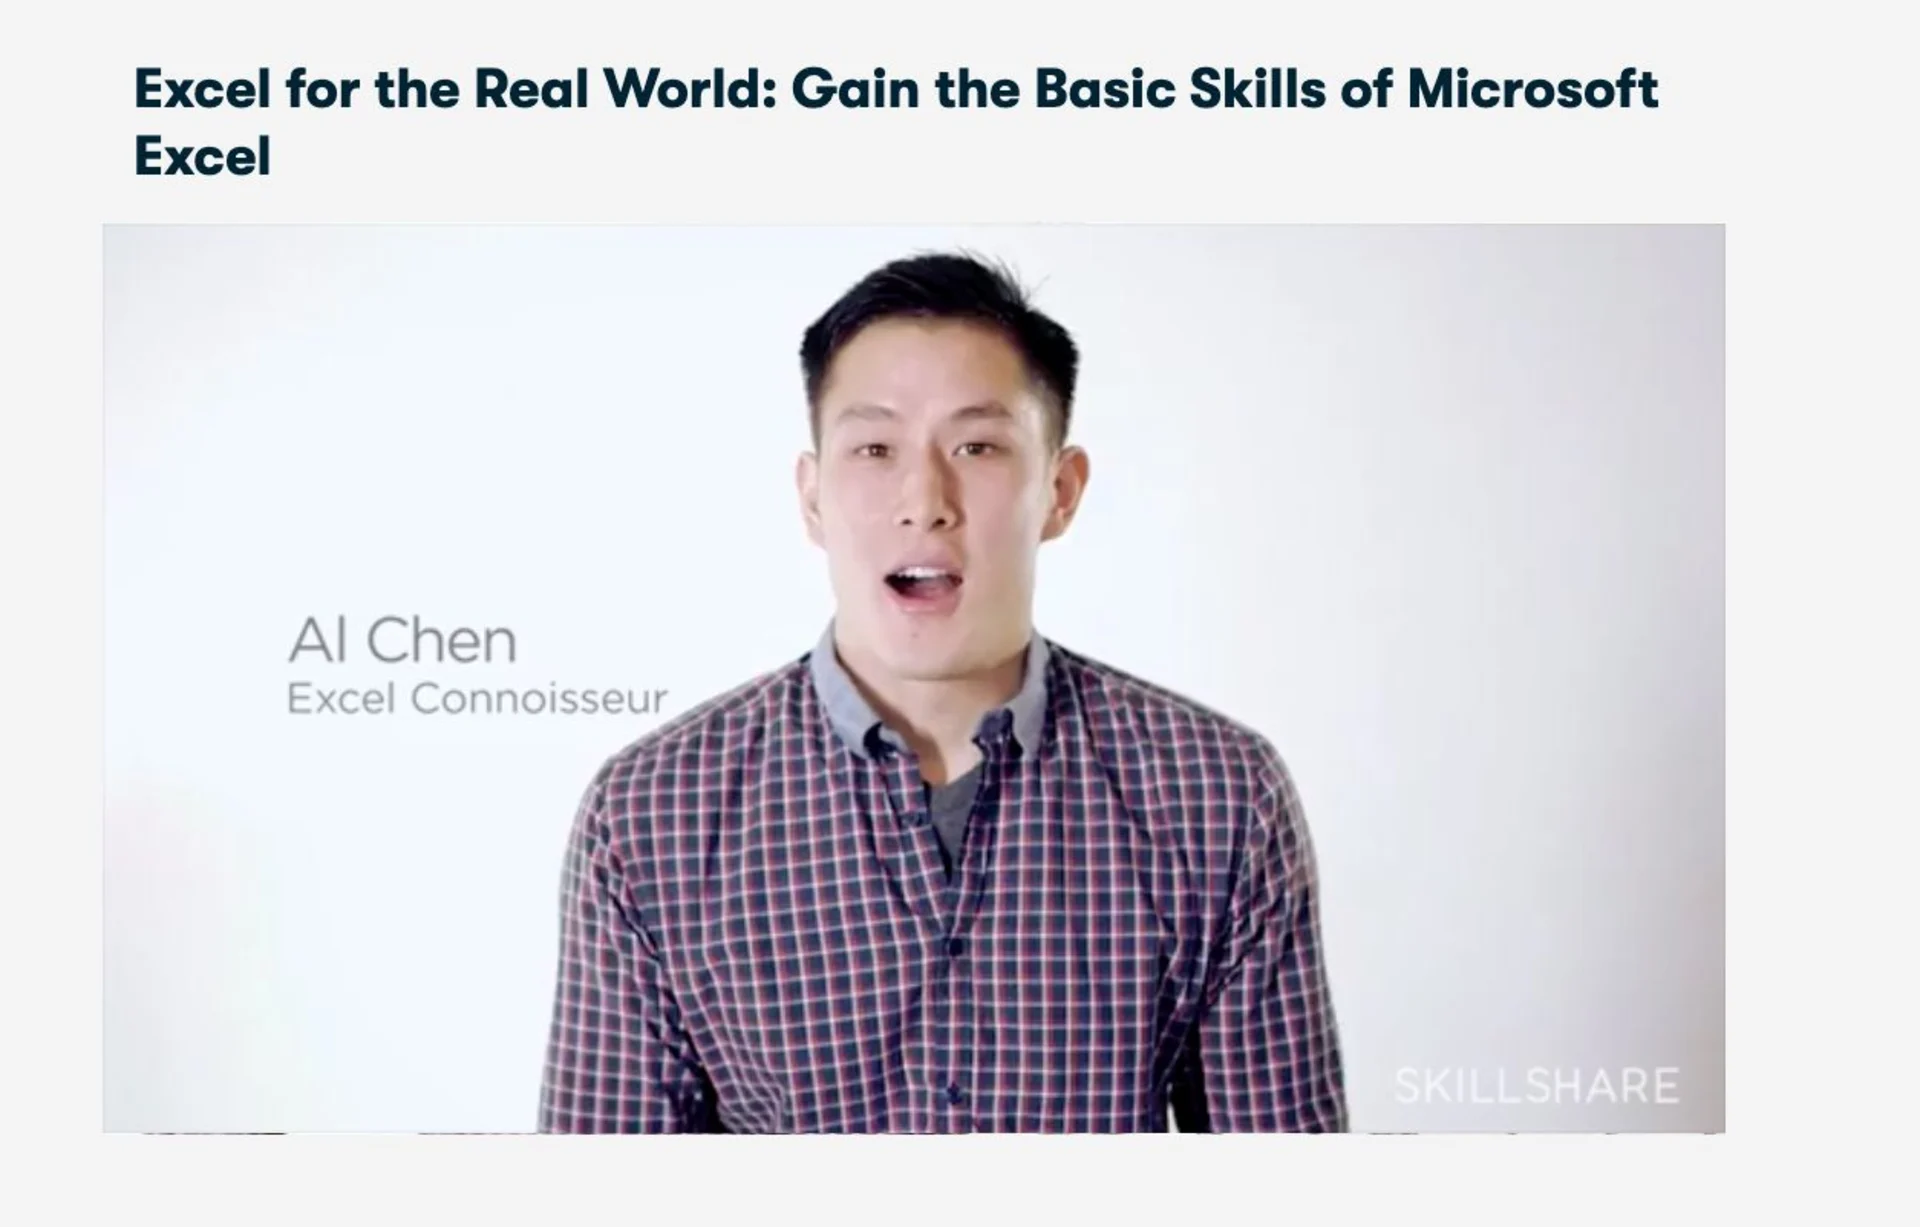 AI Chen Basic Skills of Microsoft Excel Course